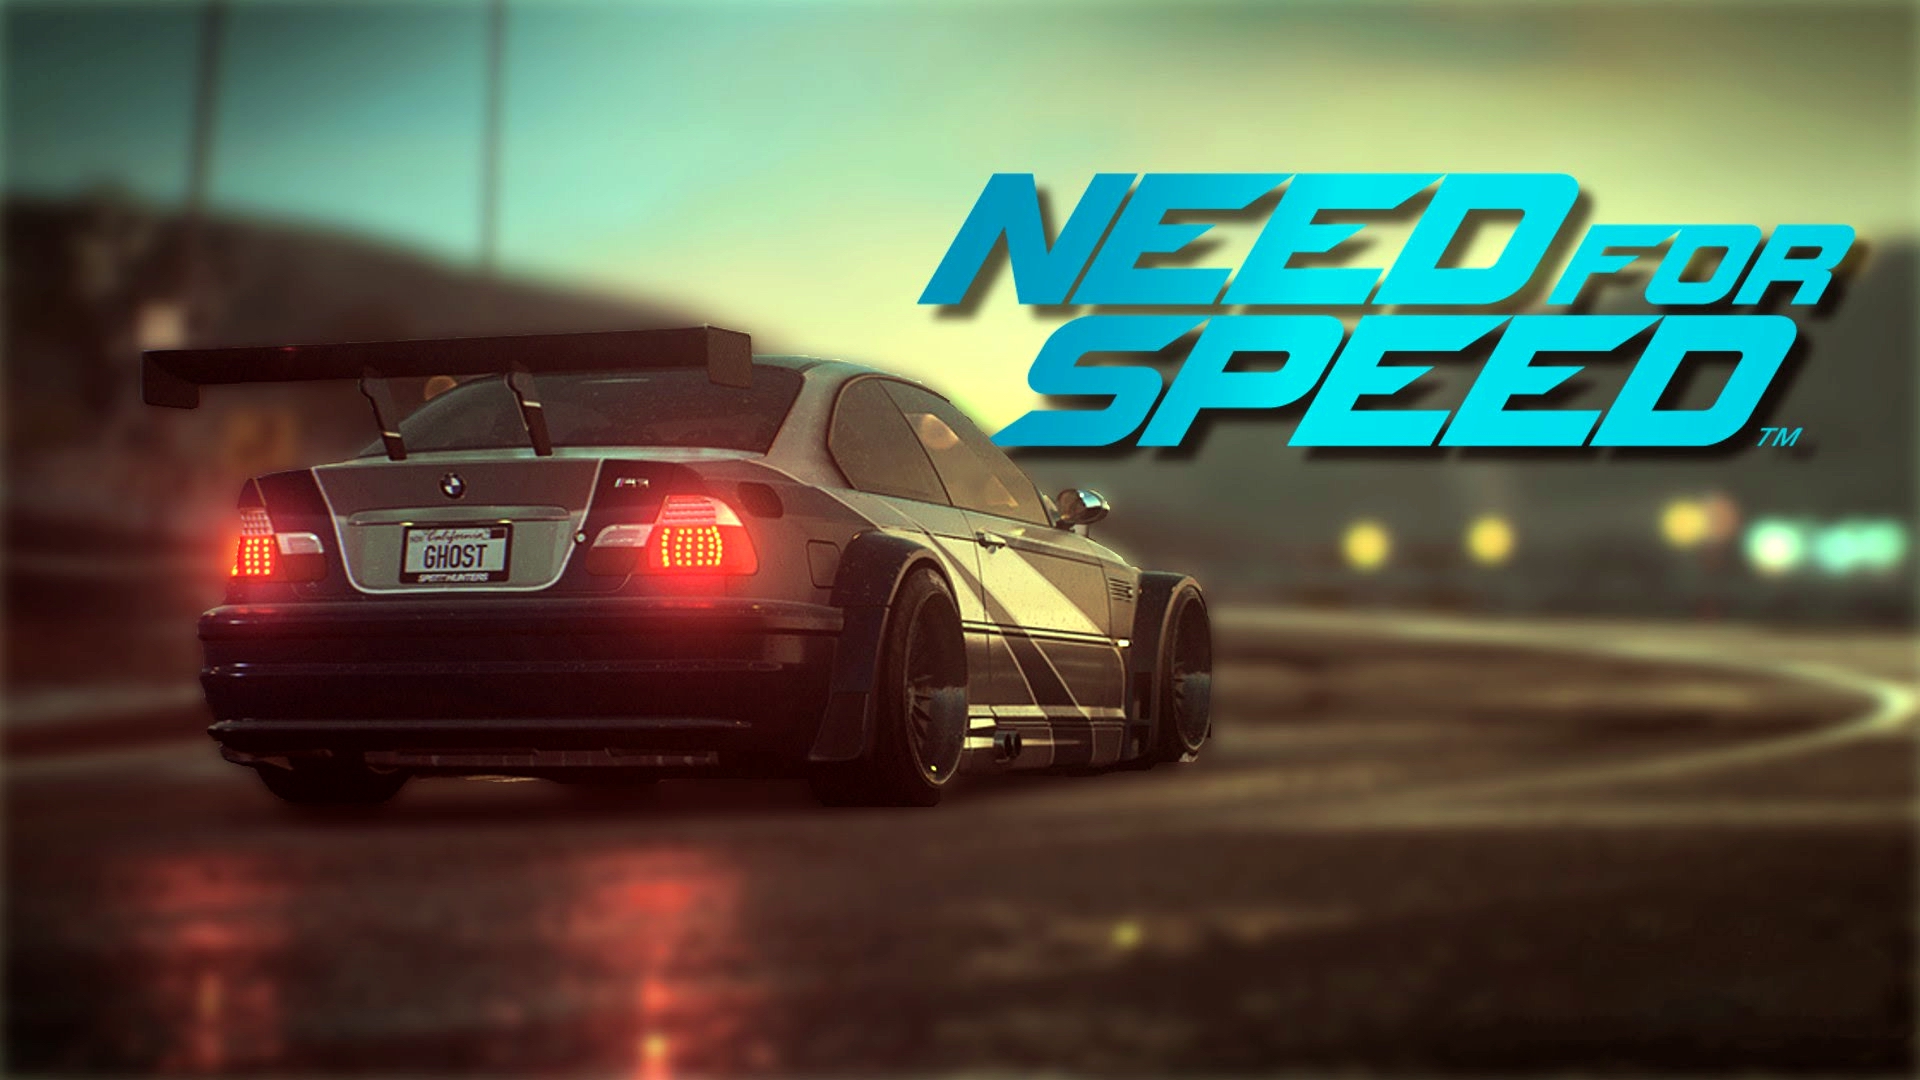 Нид 4 спид. Need for Speed 2015 ps4. Need for Speed (игра, 2015). Need for Speed most wanted Payback. Need for Speed последняя версия 2022.